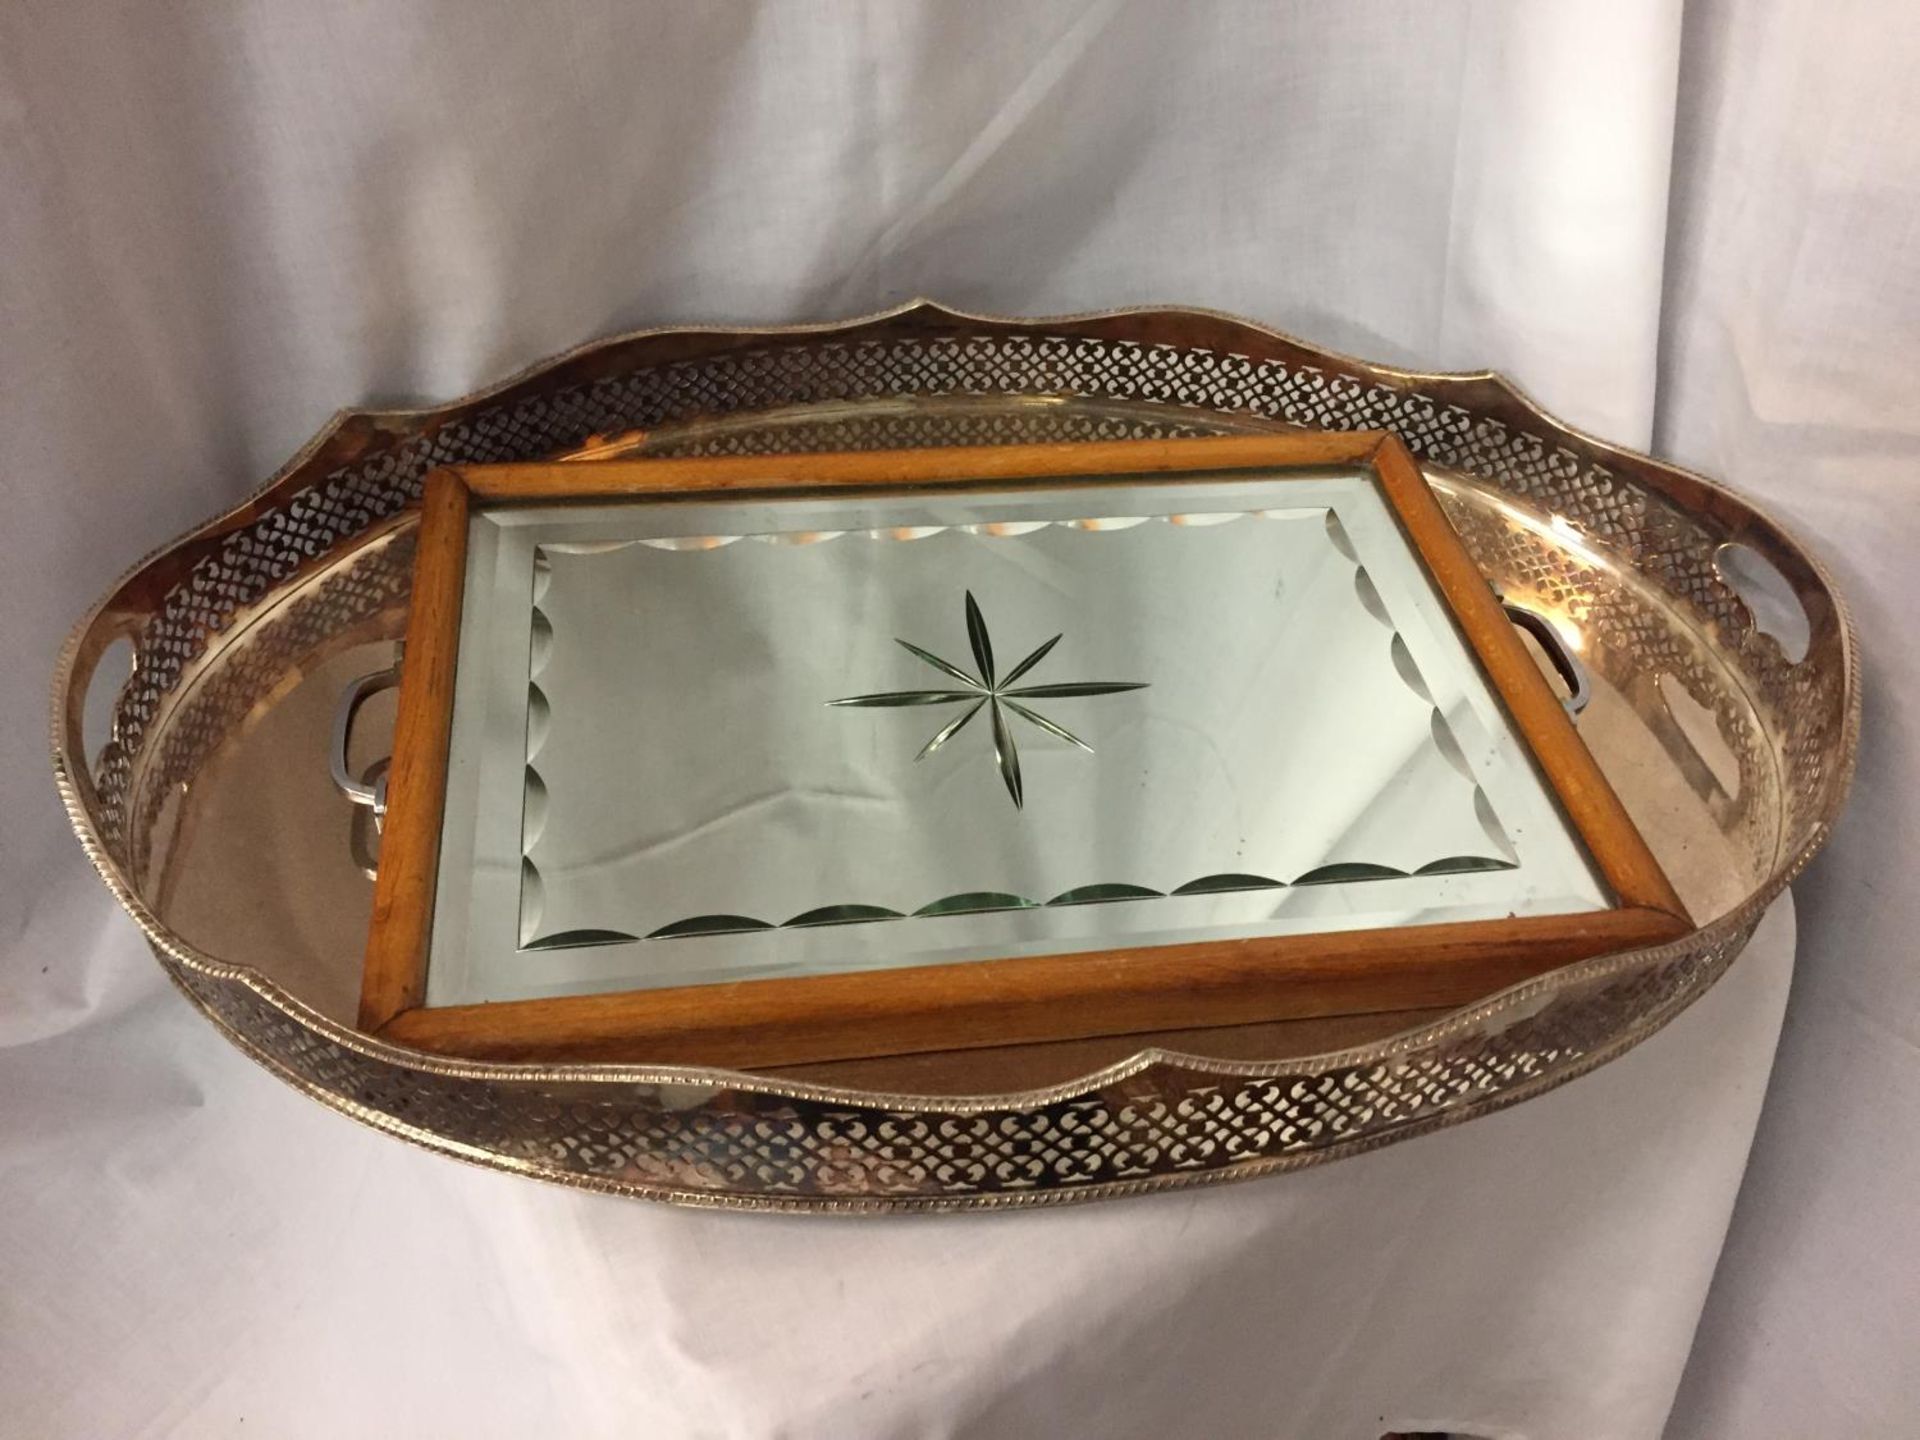 AN EPNS TRAY AND A MIRRORED TRAY